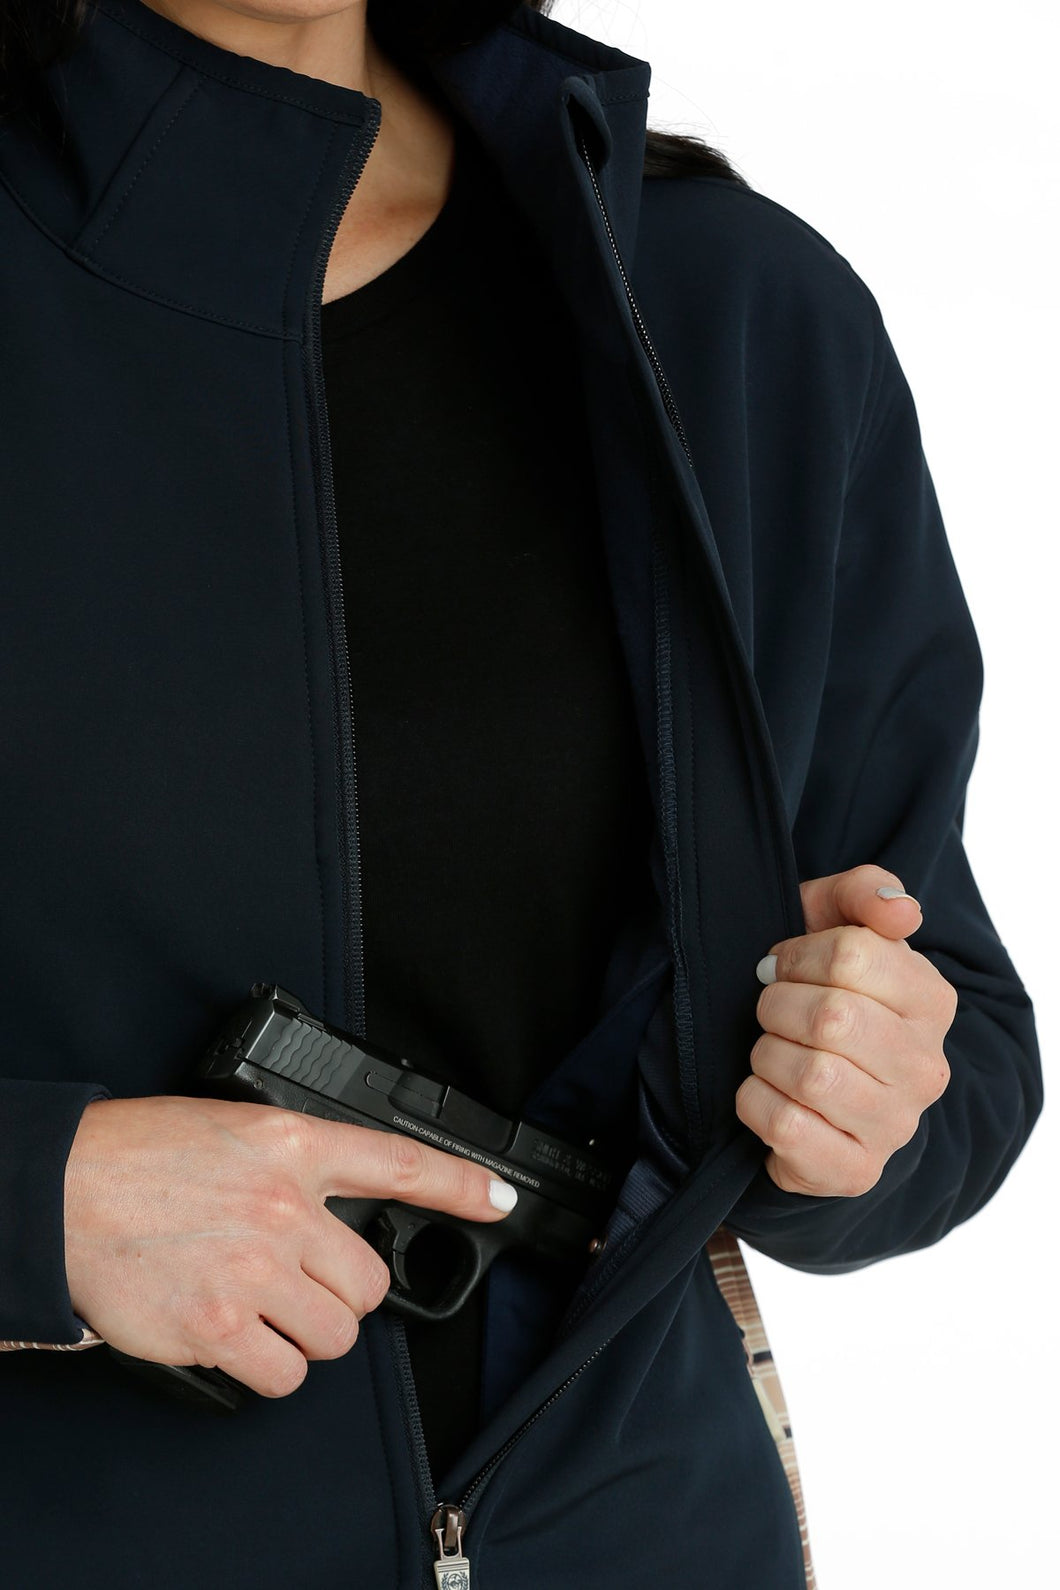 Cinch Women's Bonded Jacket w/Concealed Carry